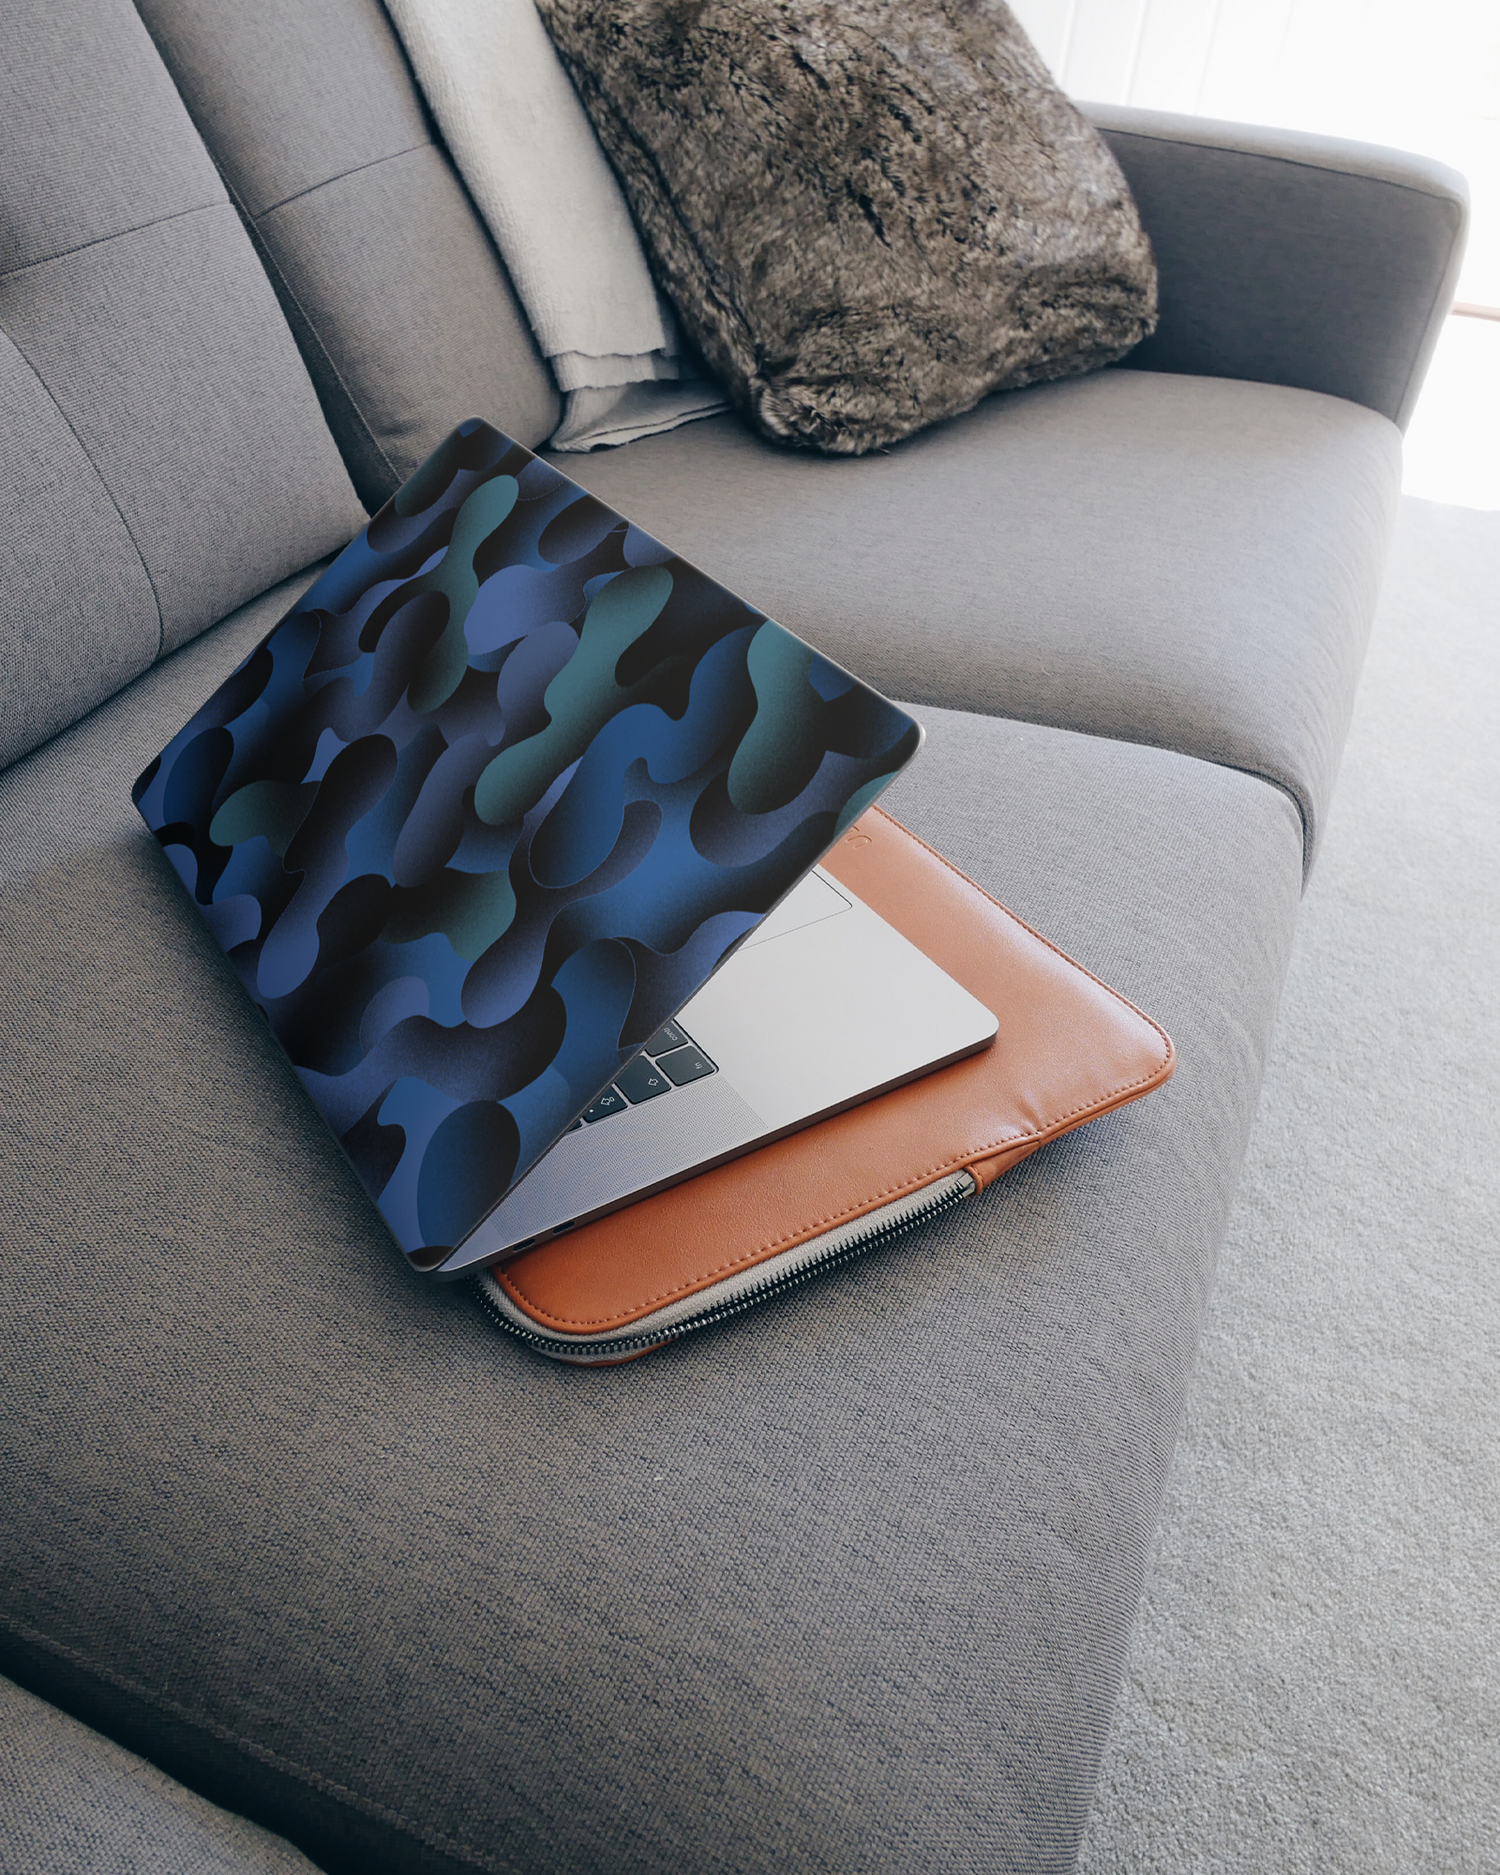 Night Moves Laptop Skin for 15 inch Apple MacBooks on a couch